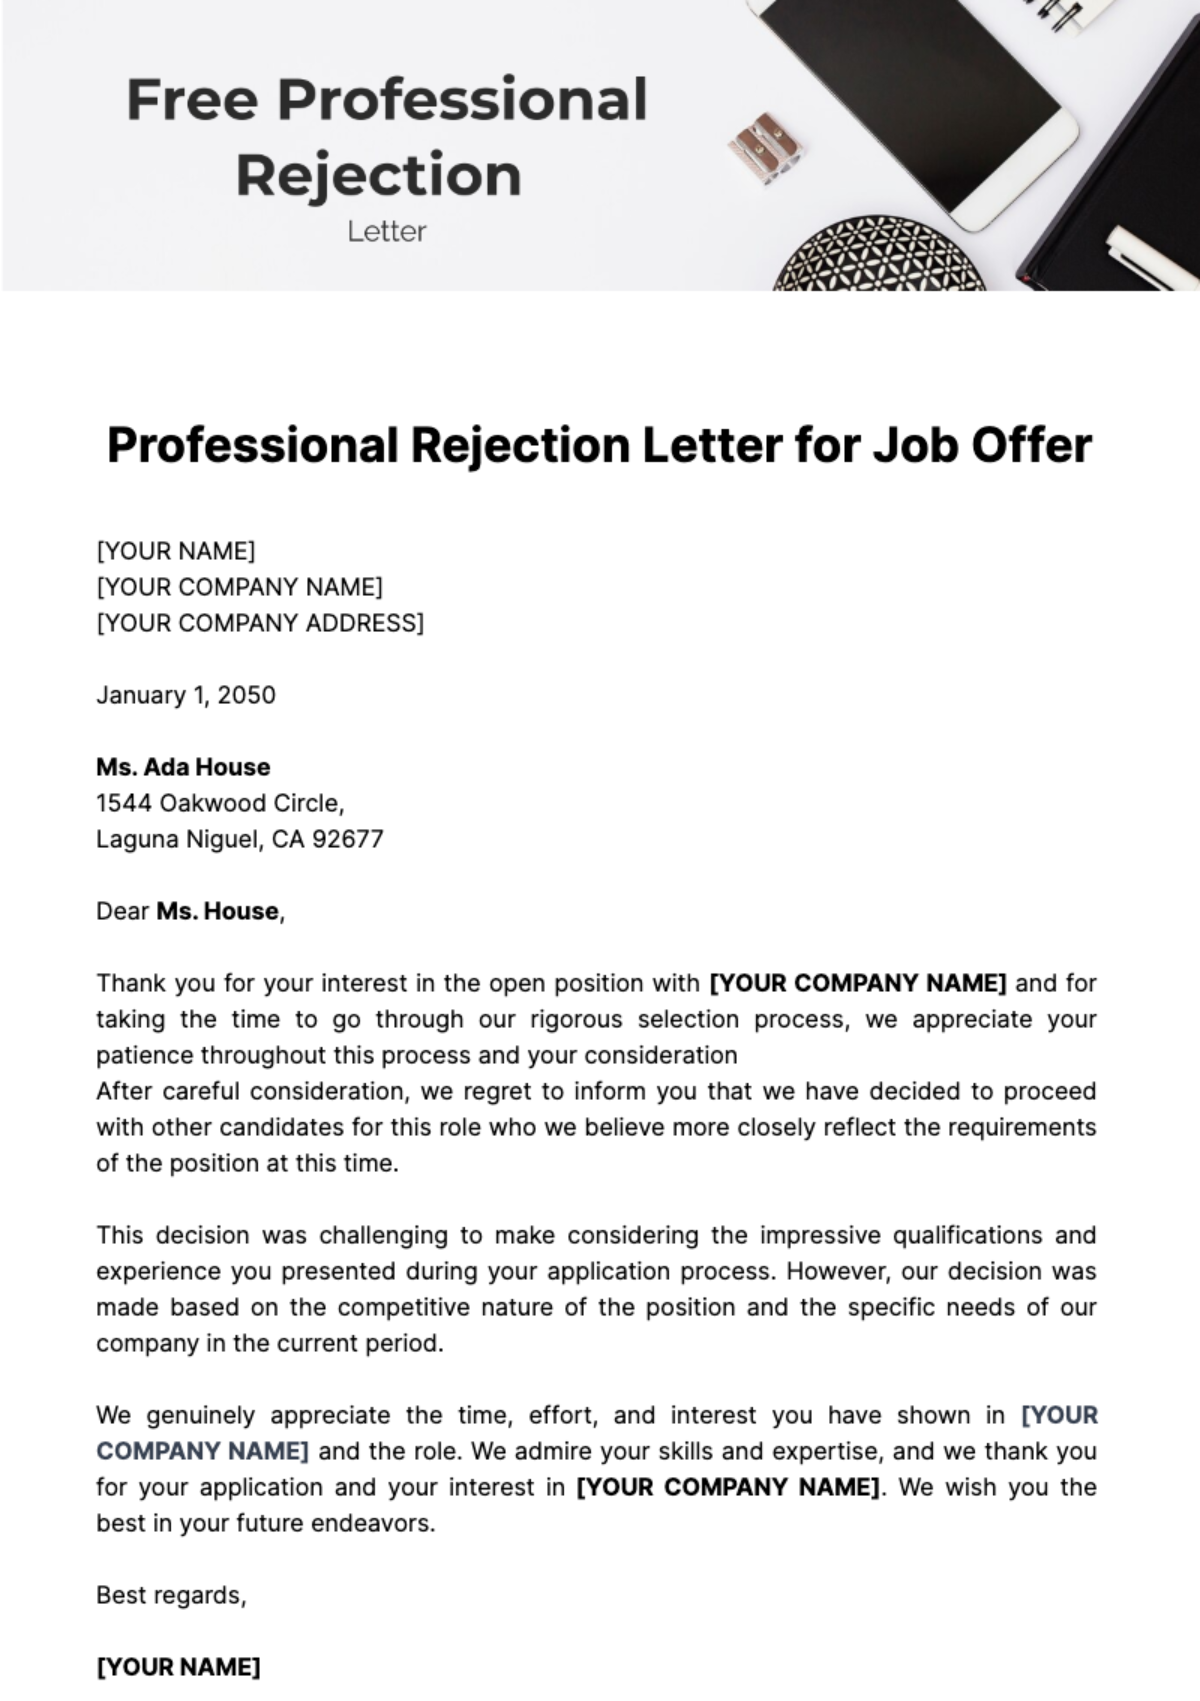 Free Professional Rejection Letter for Job Offer Template